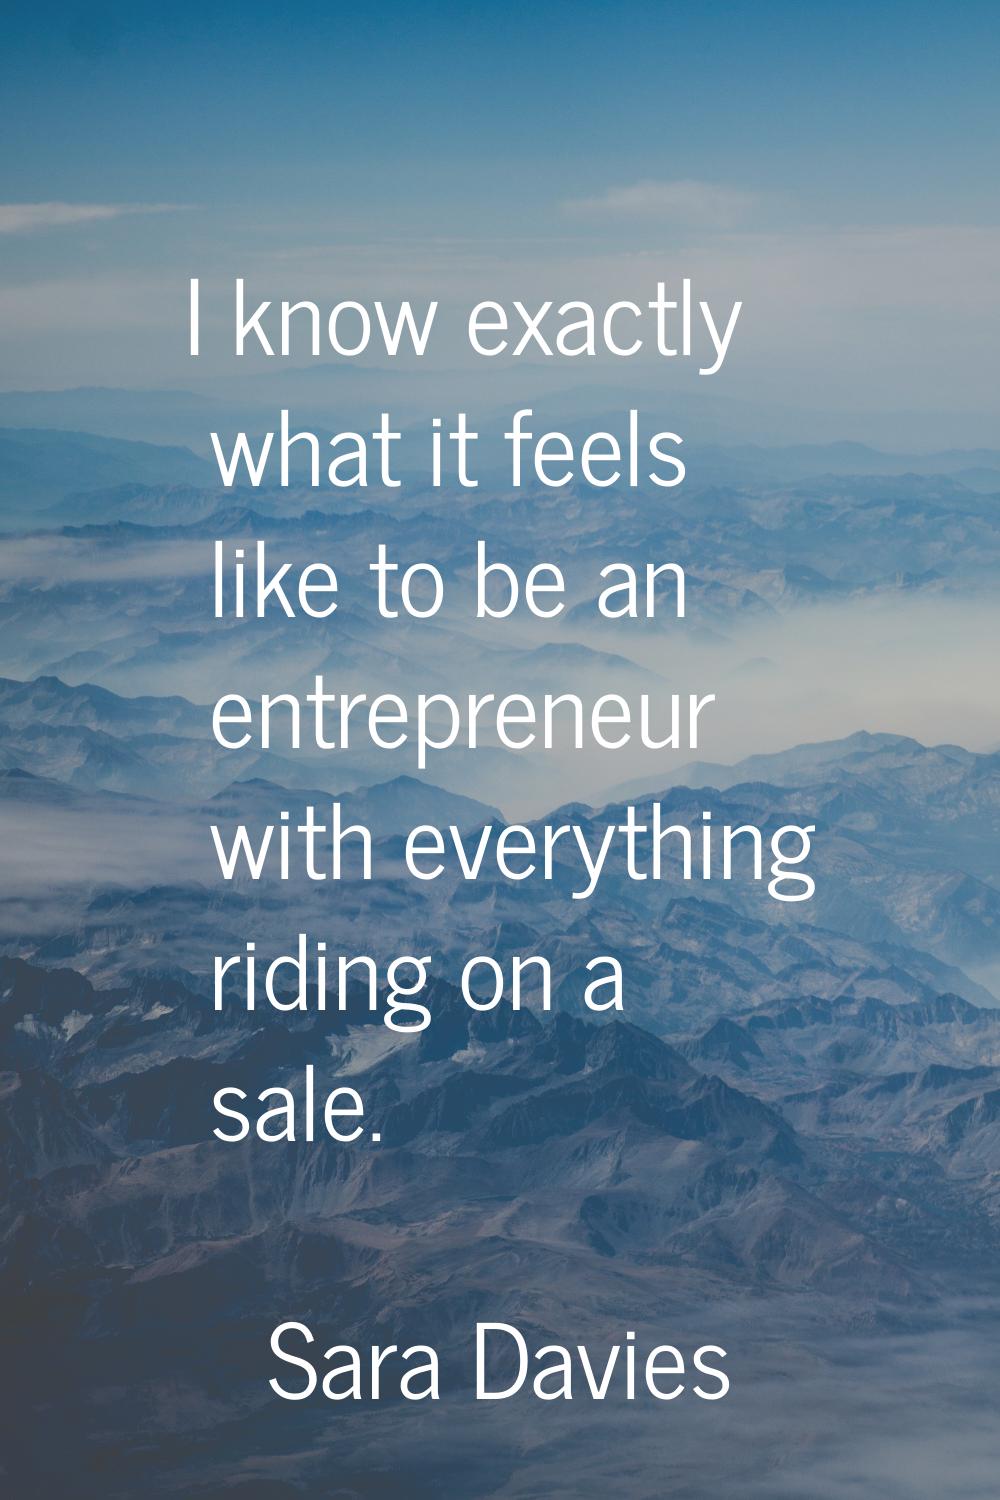 I know exactly what it feels like to be an entrepreneur with everything riding on a sale.